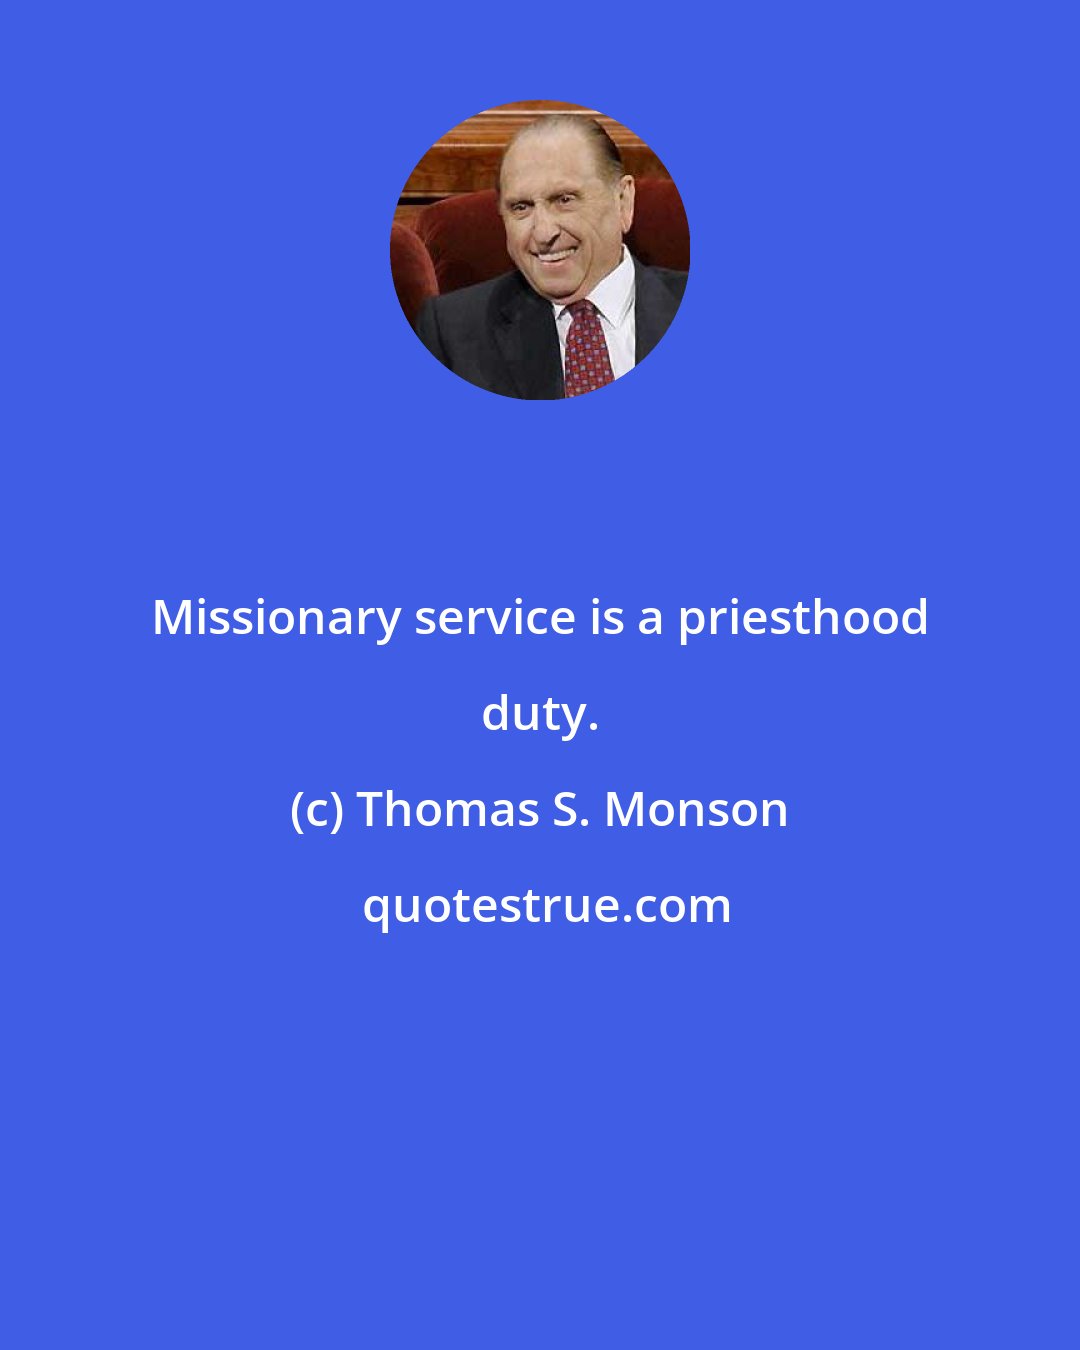 Thomas S. Monson: Missionary service is a priesthood duty.